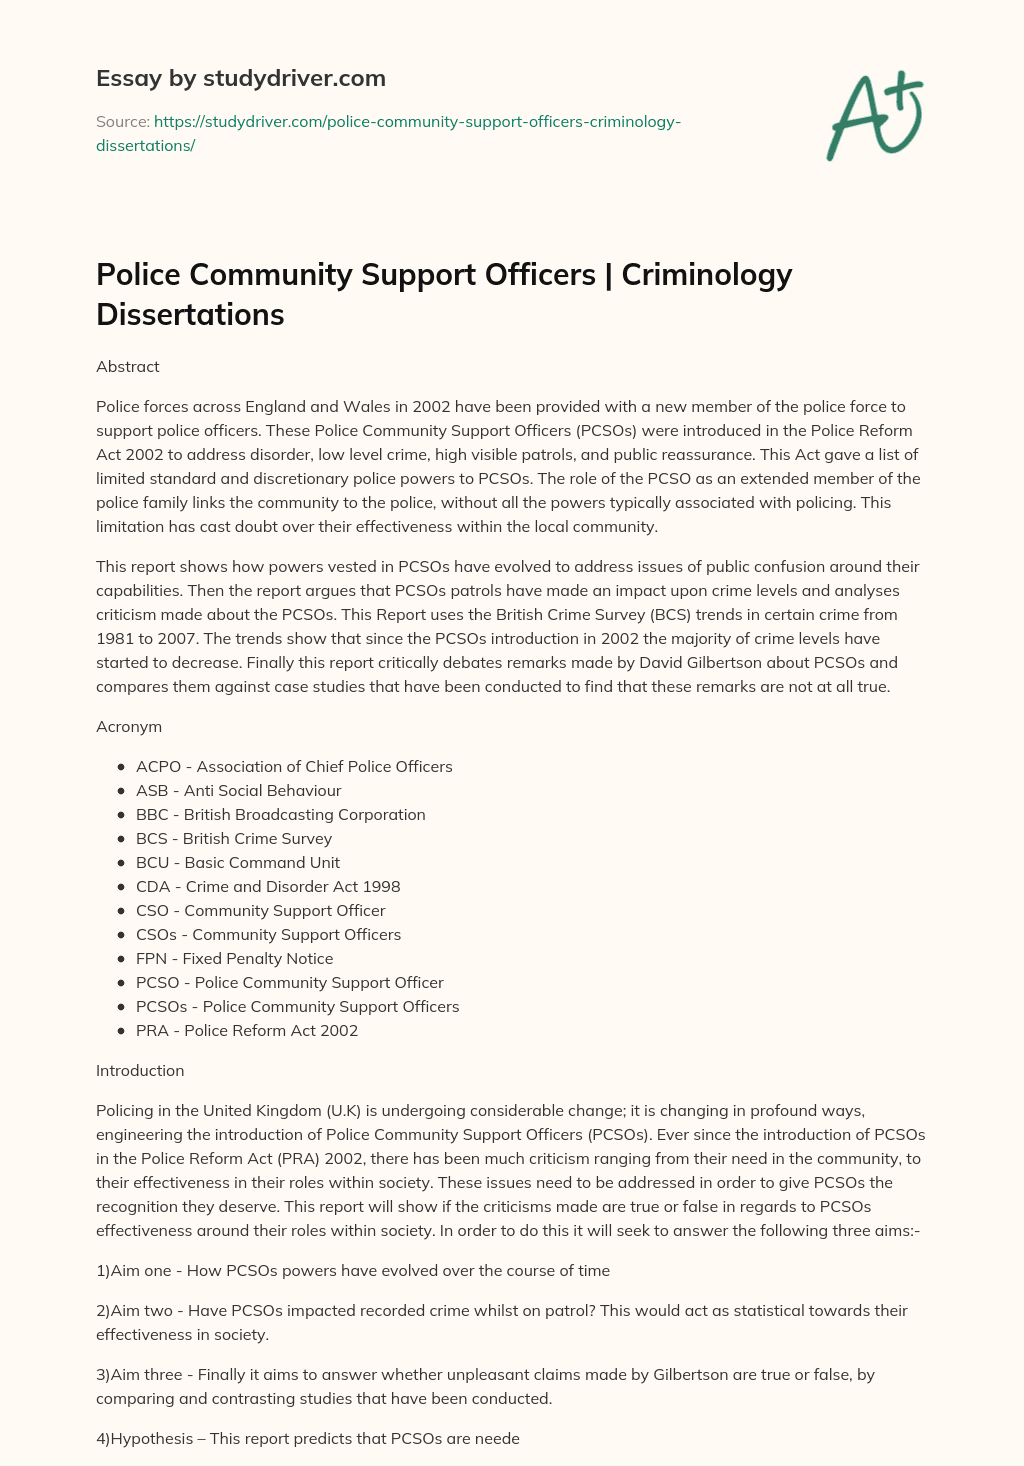 Police Community Support Officers | Criminology Dissertations essay